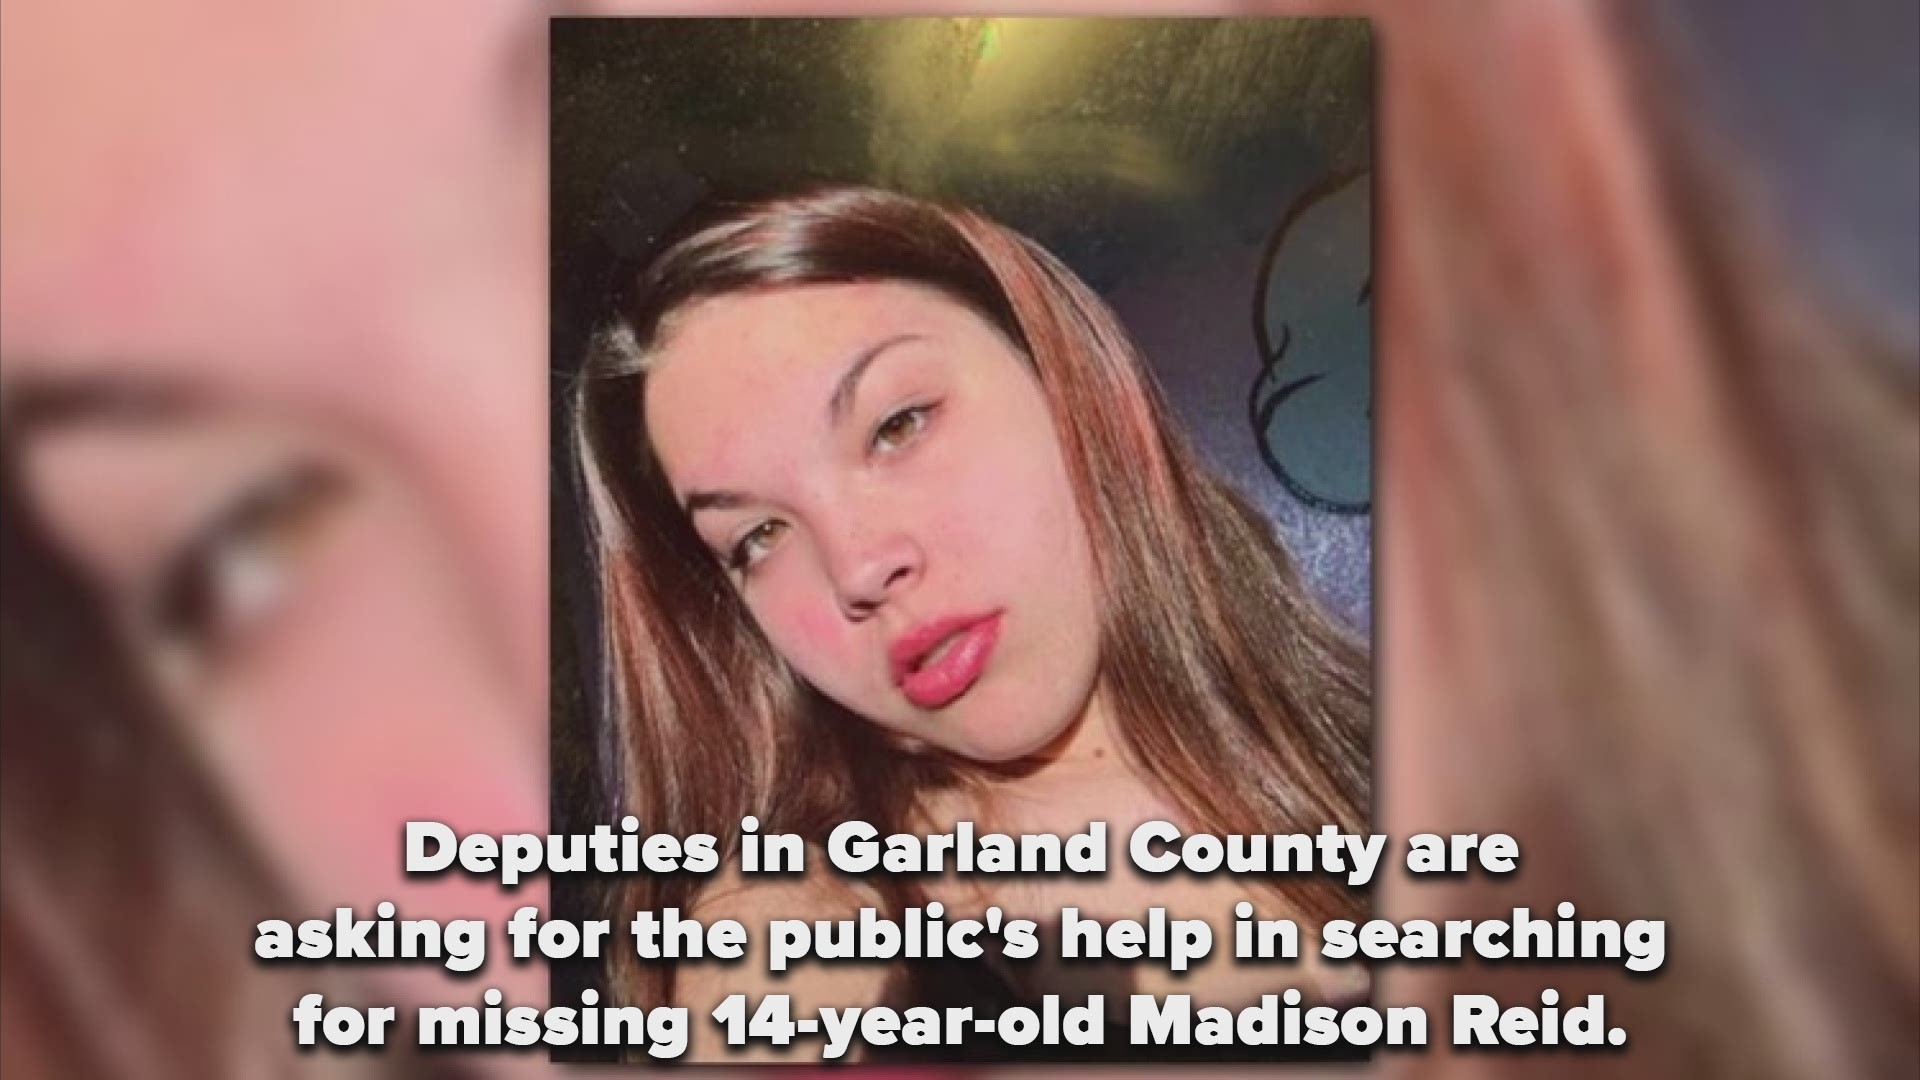 Deputies in Garland County are asking for the public's help in searching for missing 14-year-old Madison Reid.